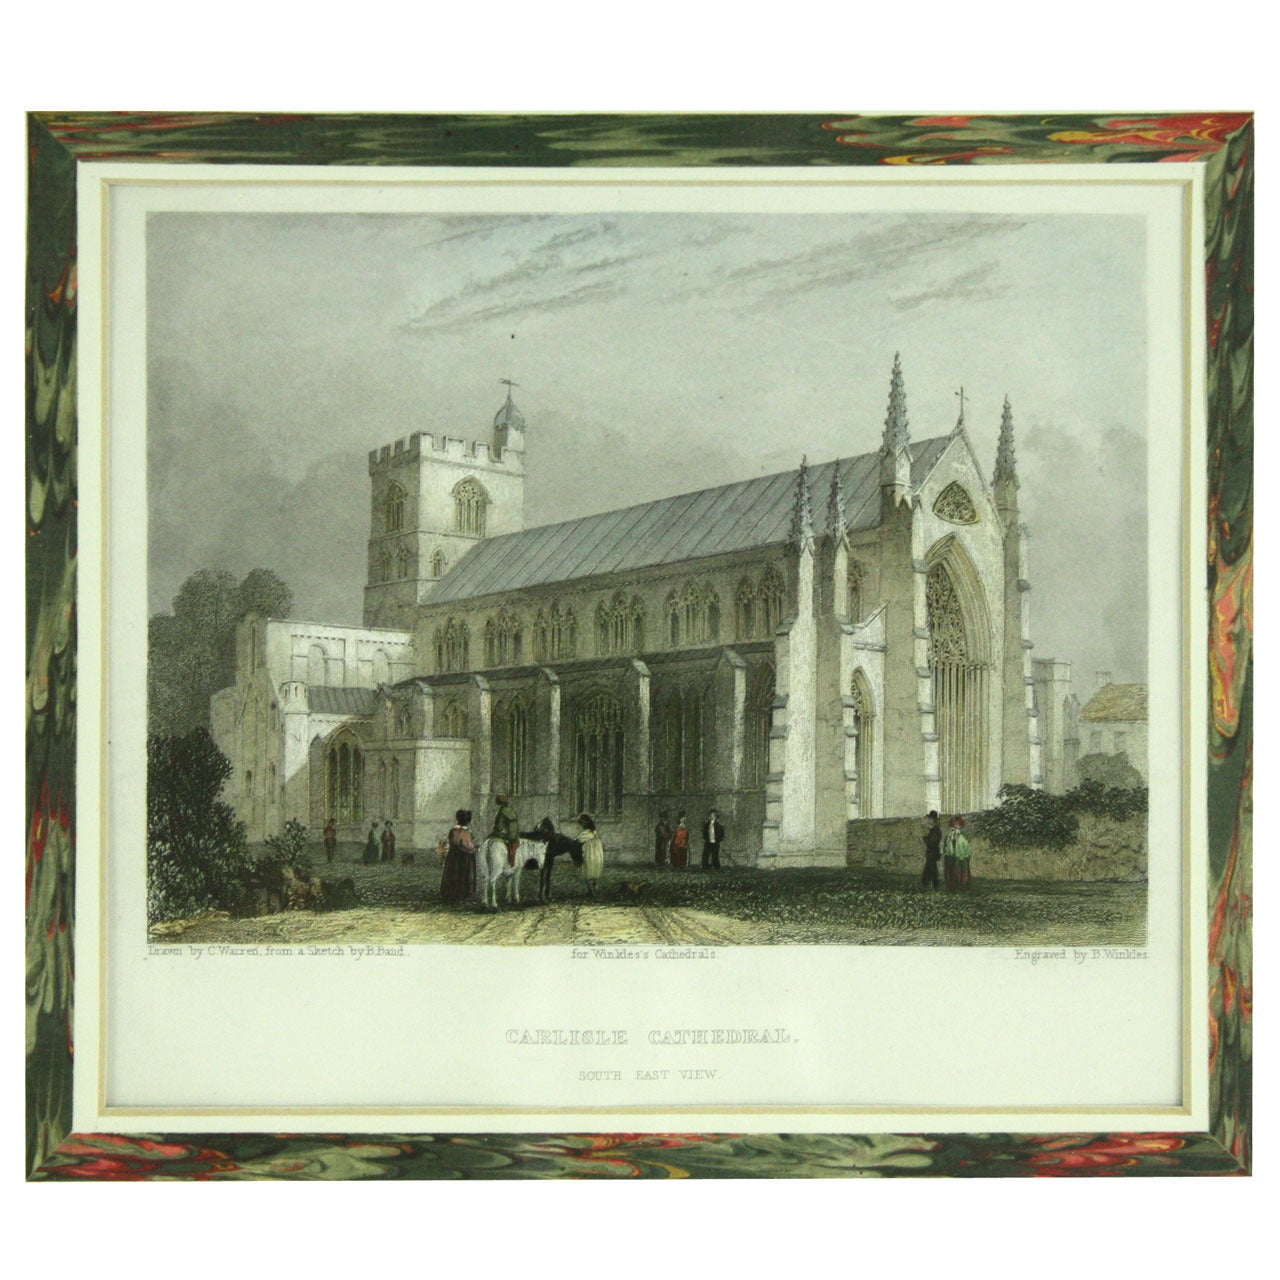 Six Antique Framed Engravings, Hand-Colored of Carlisle Cathedral, England